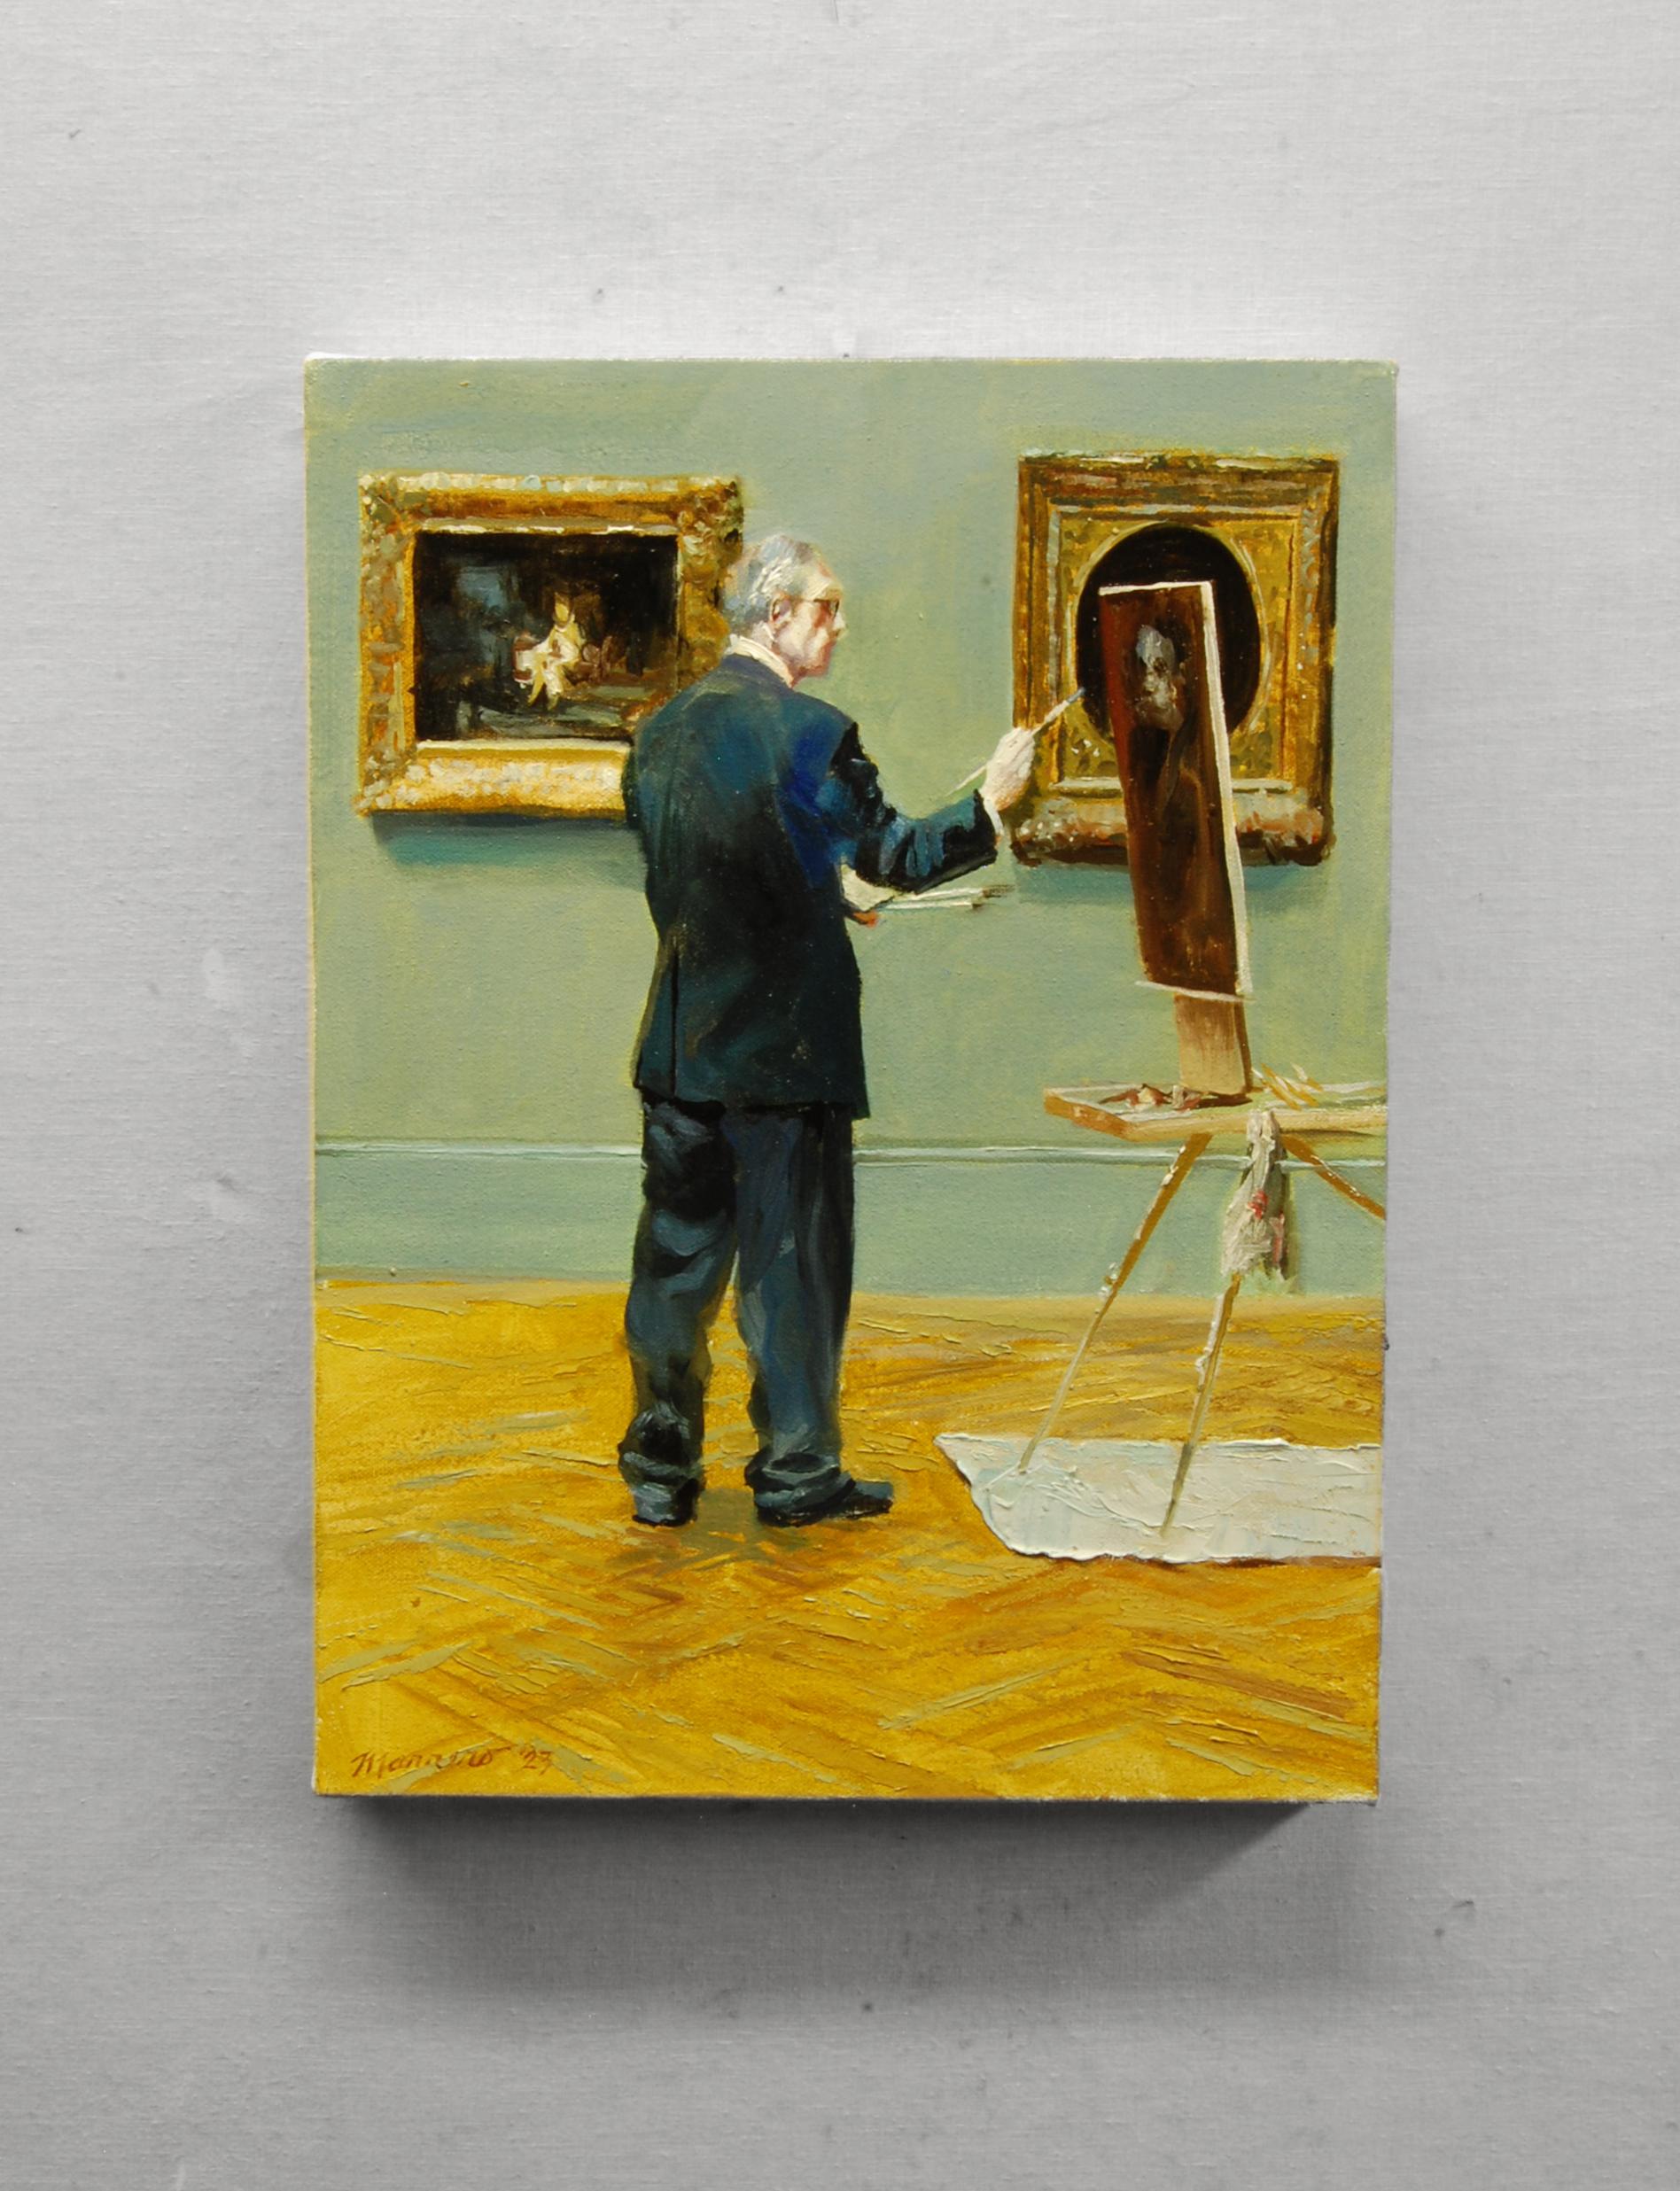 <p>Artist Comments<br>This painting combines two of artist Onelio Marrero's interests: his love for the Metropolitan Museum of Art in New York City and his fascination with observing artists at work. It portrays an elegantly dressed man engrossed in